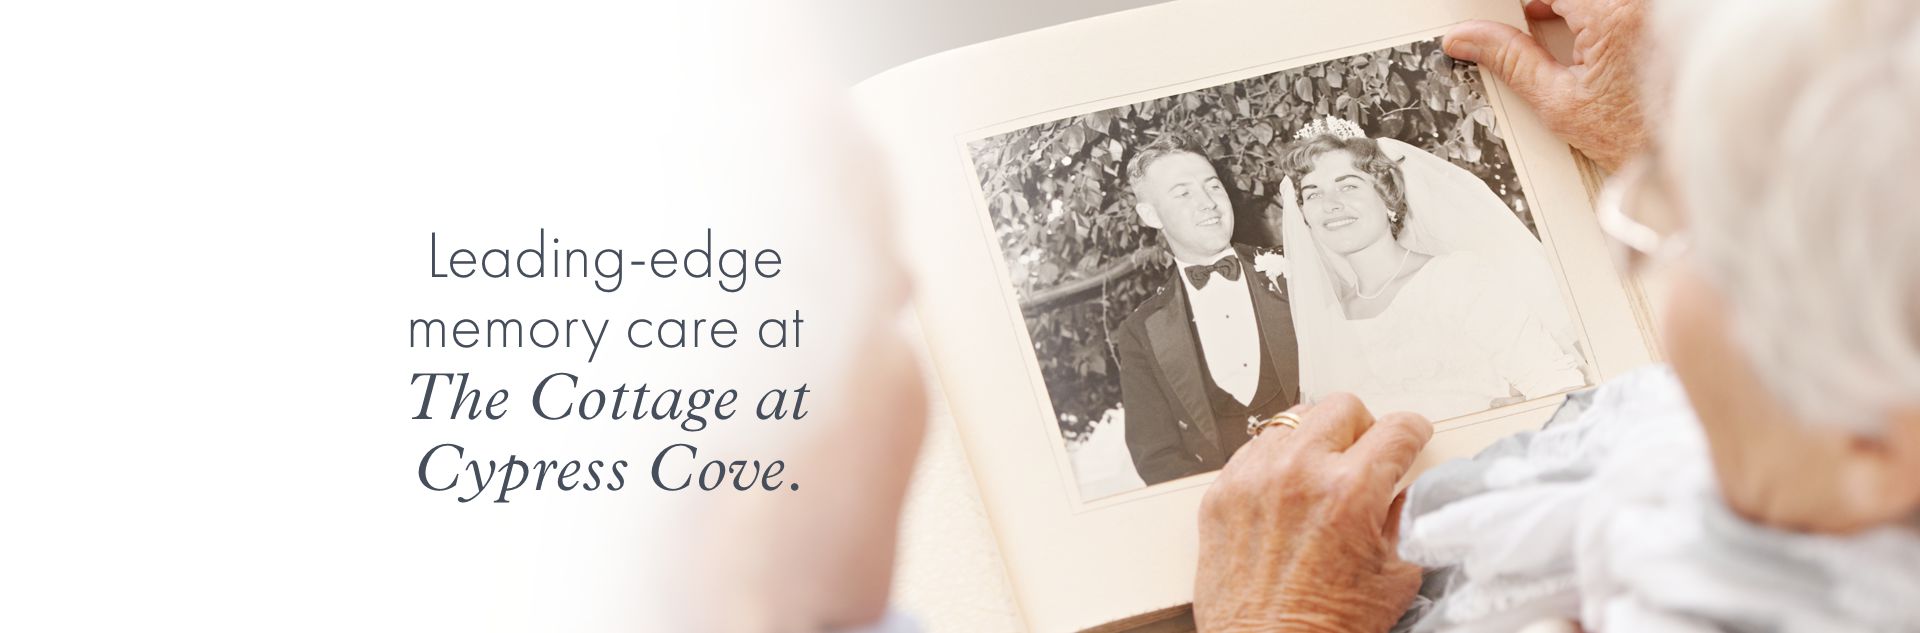 Leading-edge care at The Cottage at Cypress Cove.